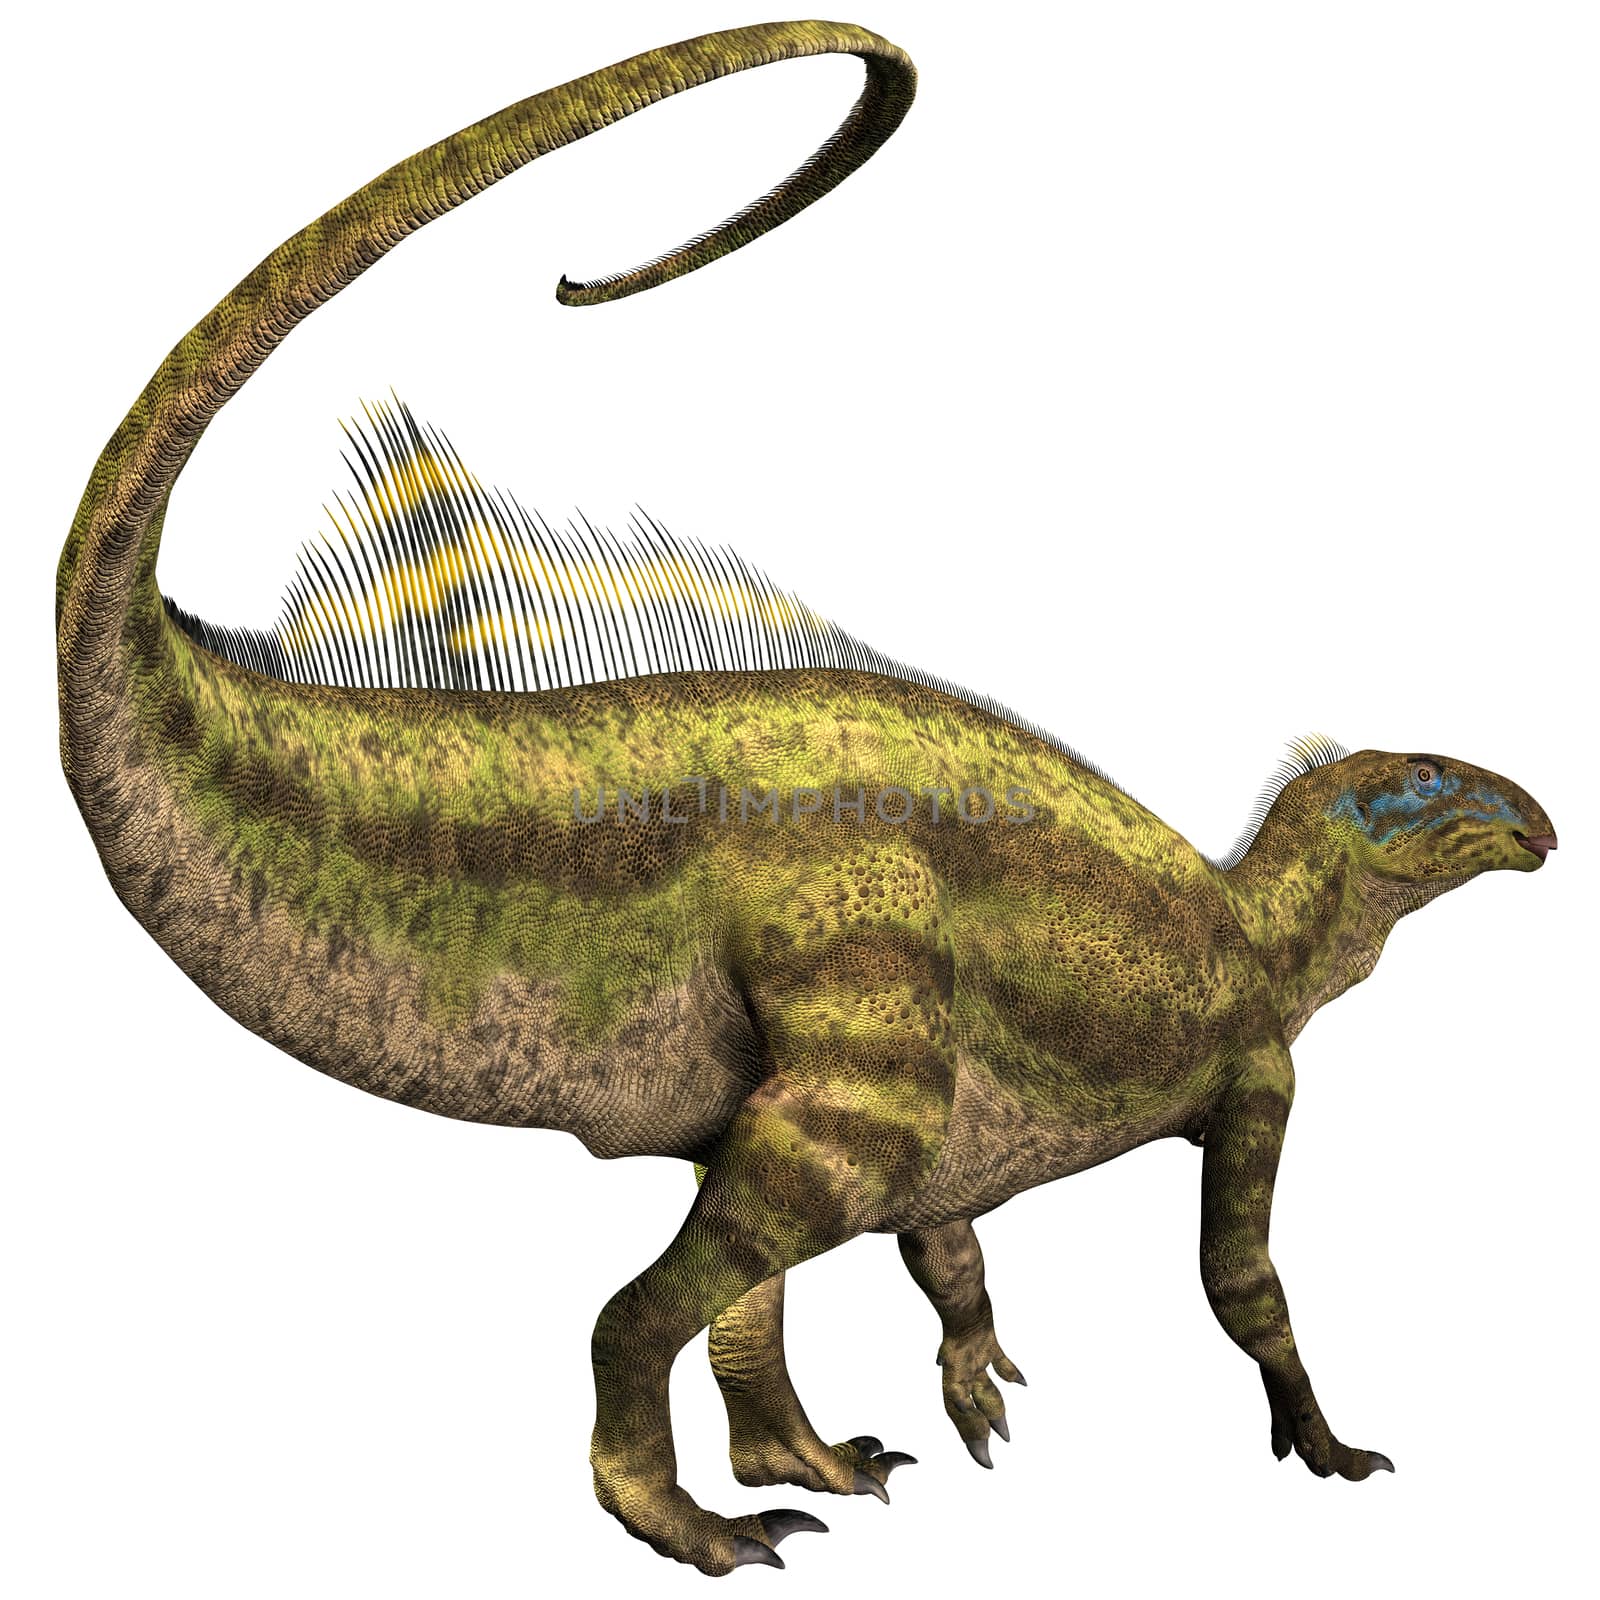 Tenontosaurus was an ornithopod herbivorous dinosaur that lived during the Cretaceous Period of North America.